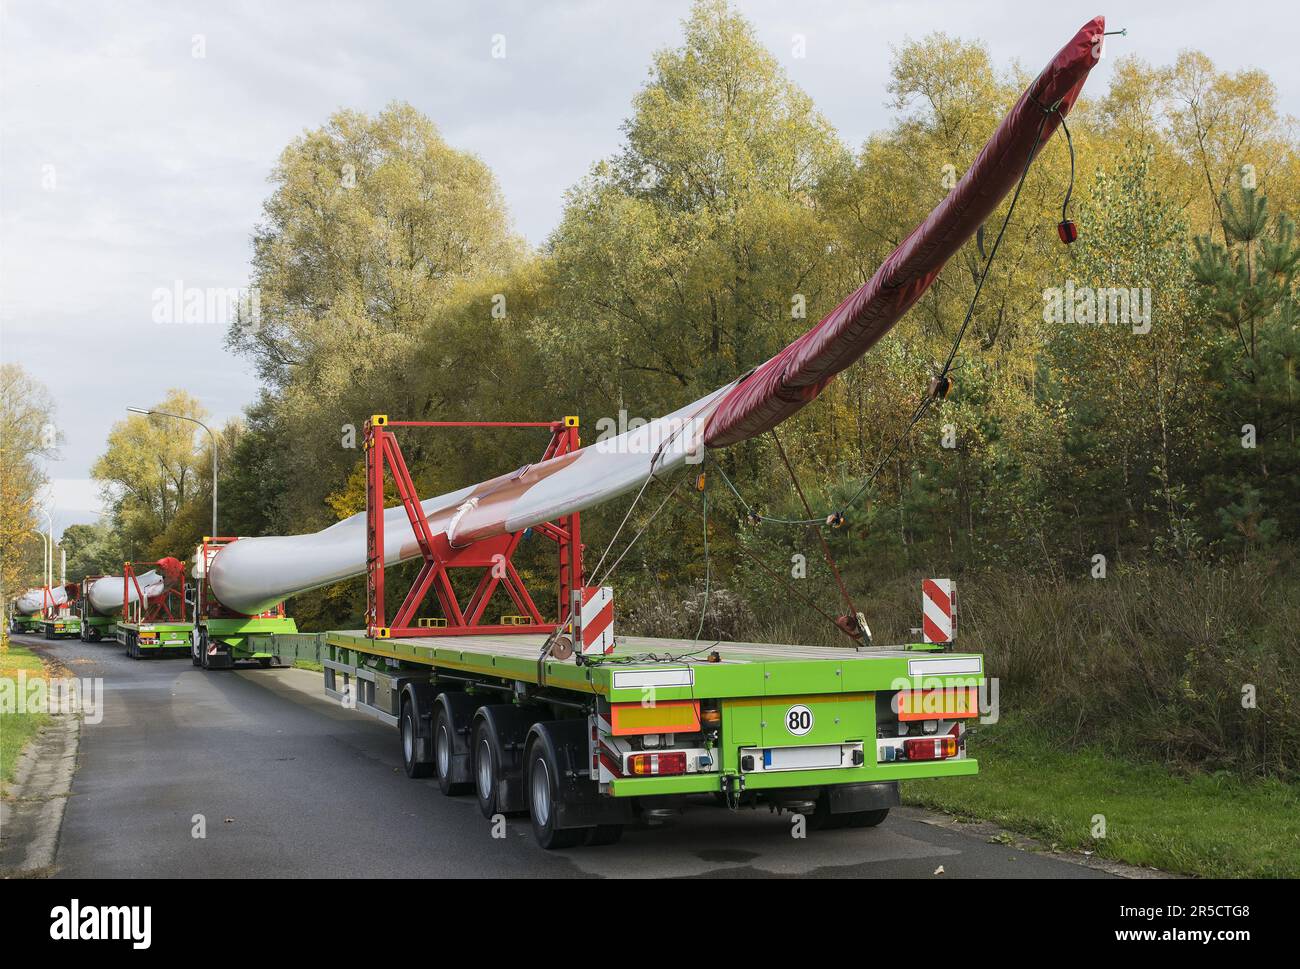 Roadside parking convoy of special trucks with oversize loads transporting rotor blades for wind power plant turbines Stock Photo